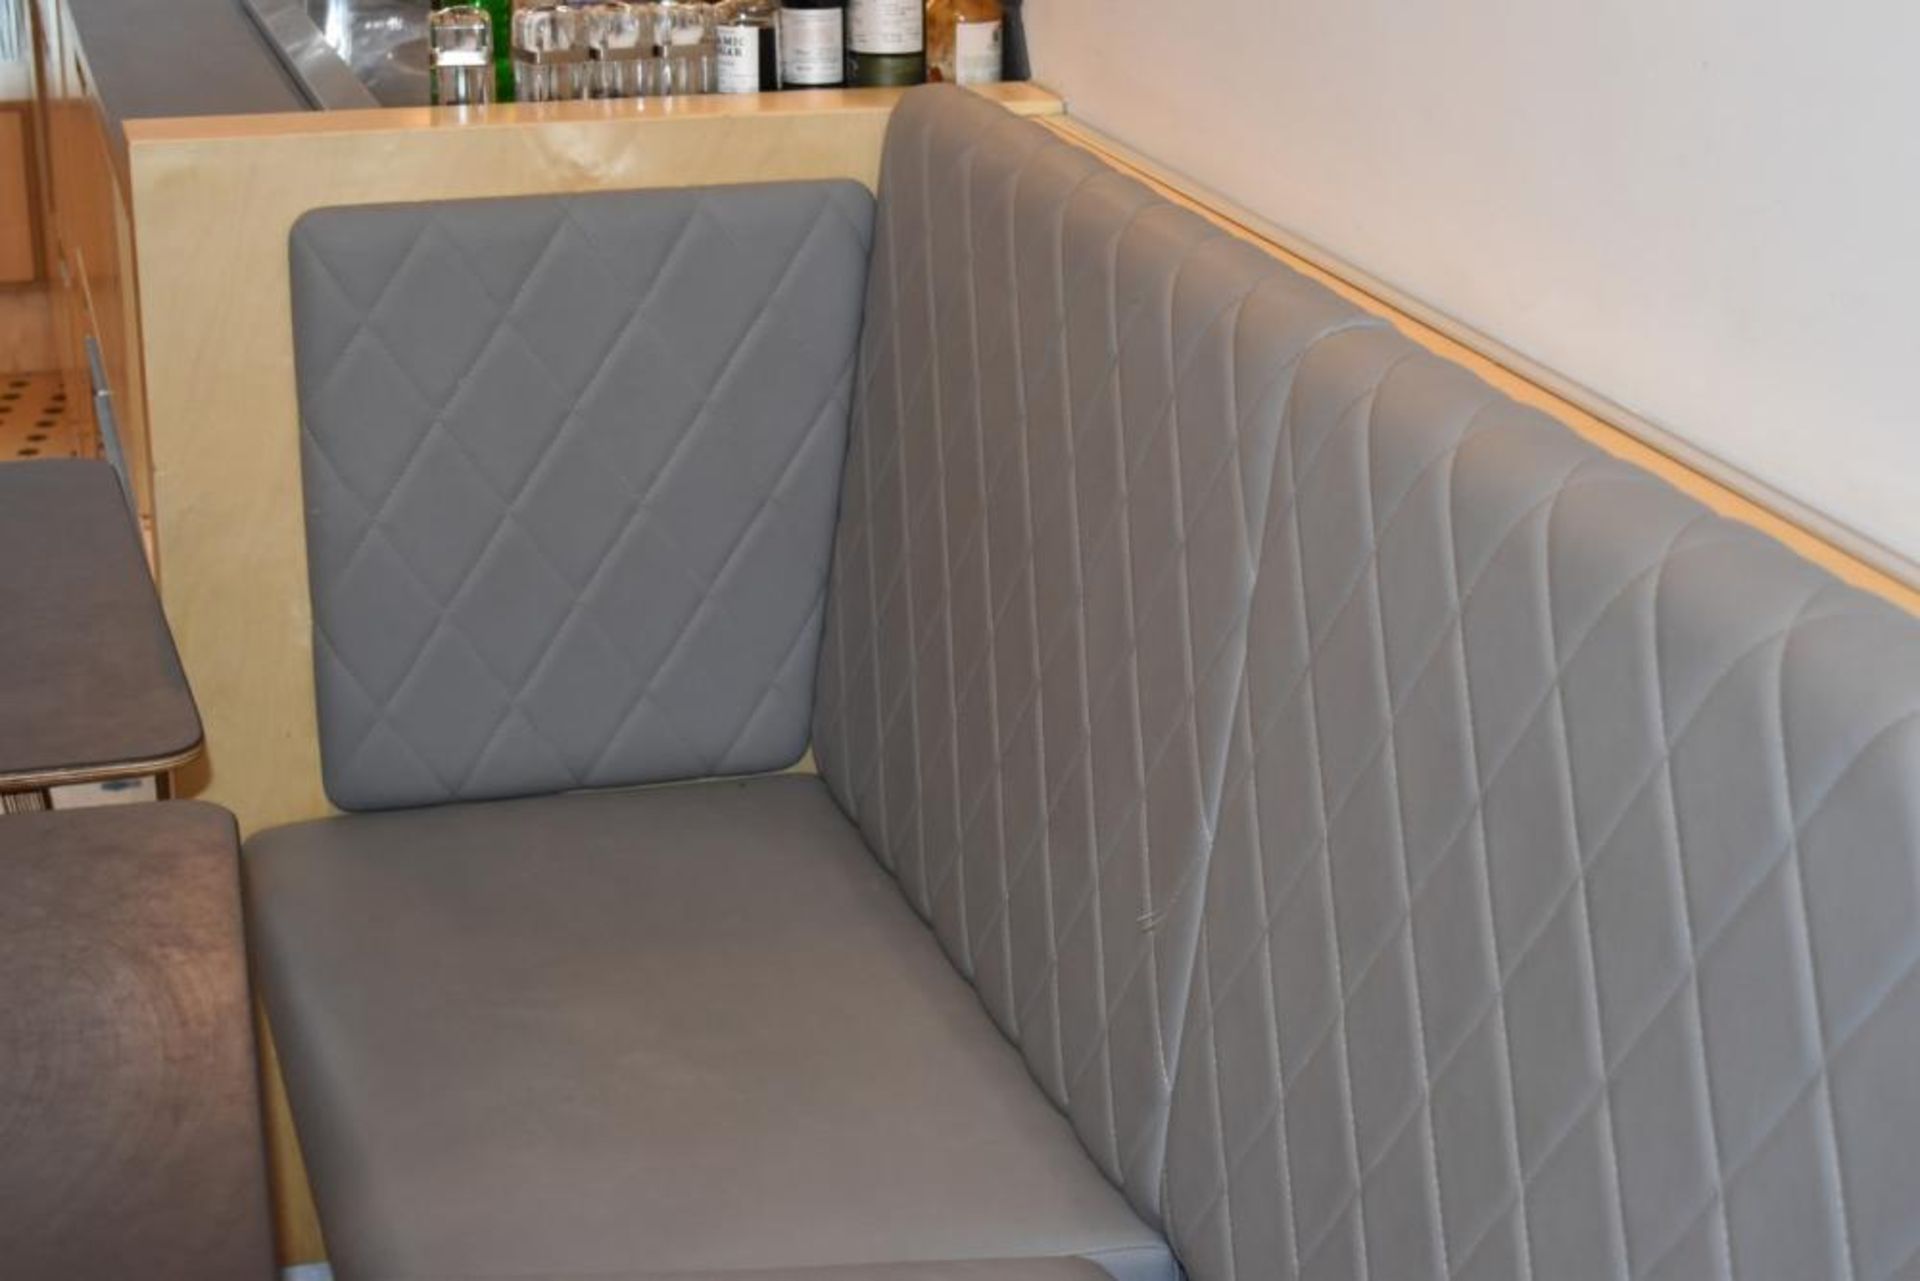 1 x Seating Banquette With Diamond Faux Leather Design Upholstery in Grey - Approx 25ft in - Image 5 of 5